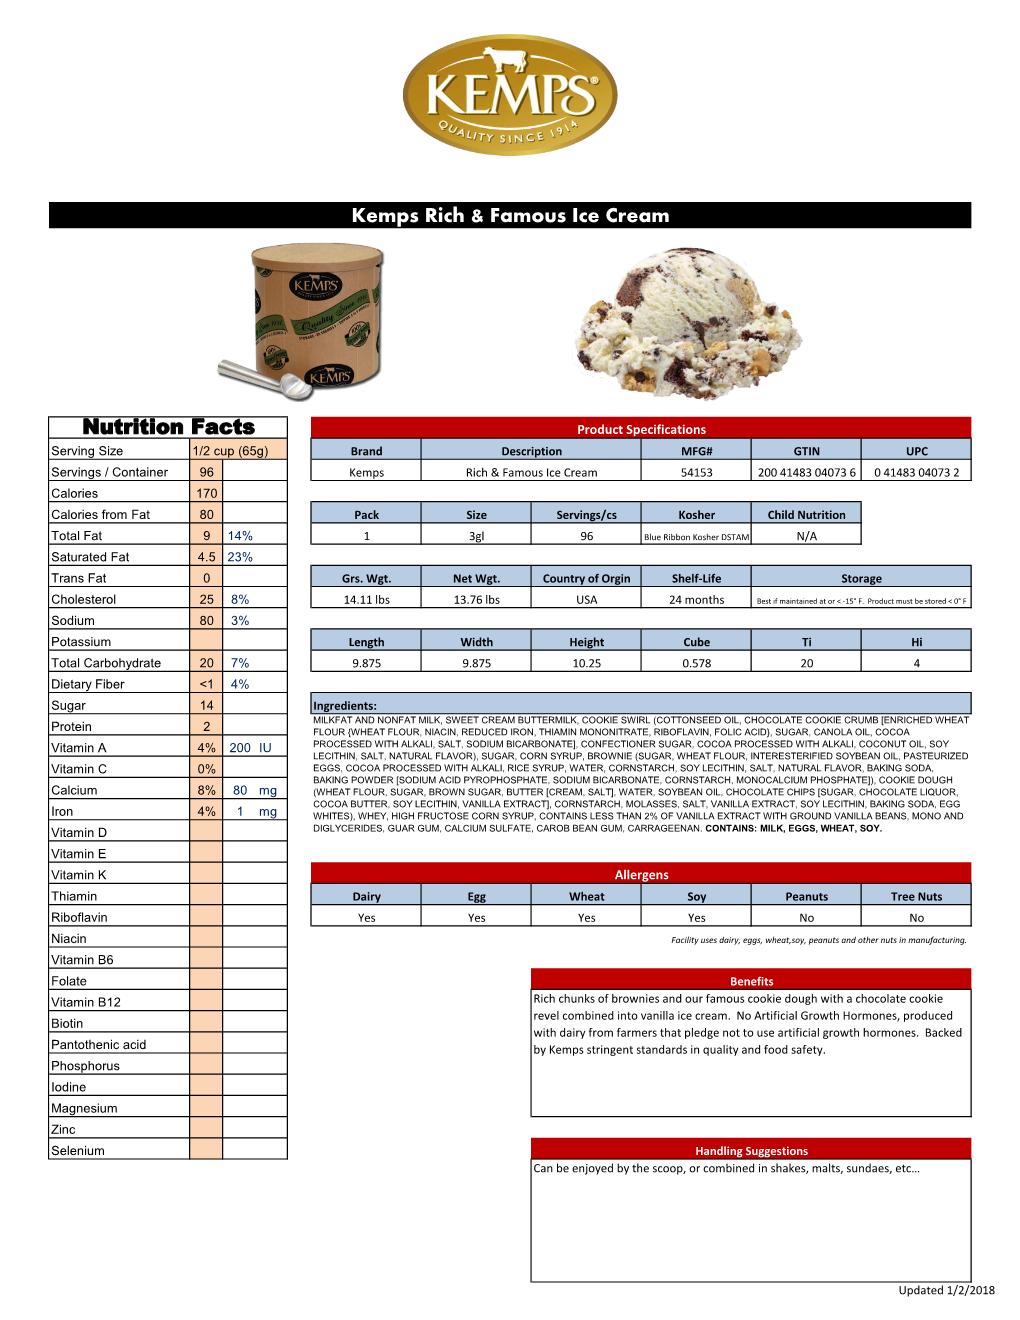 Kemps Rich & Famous Ice Cream Nutrition Facts